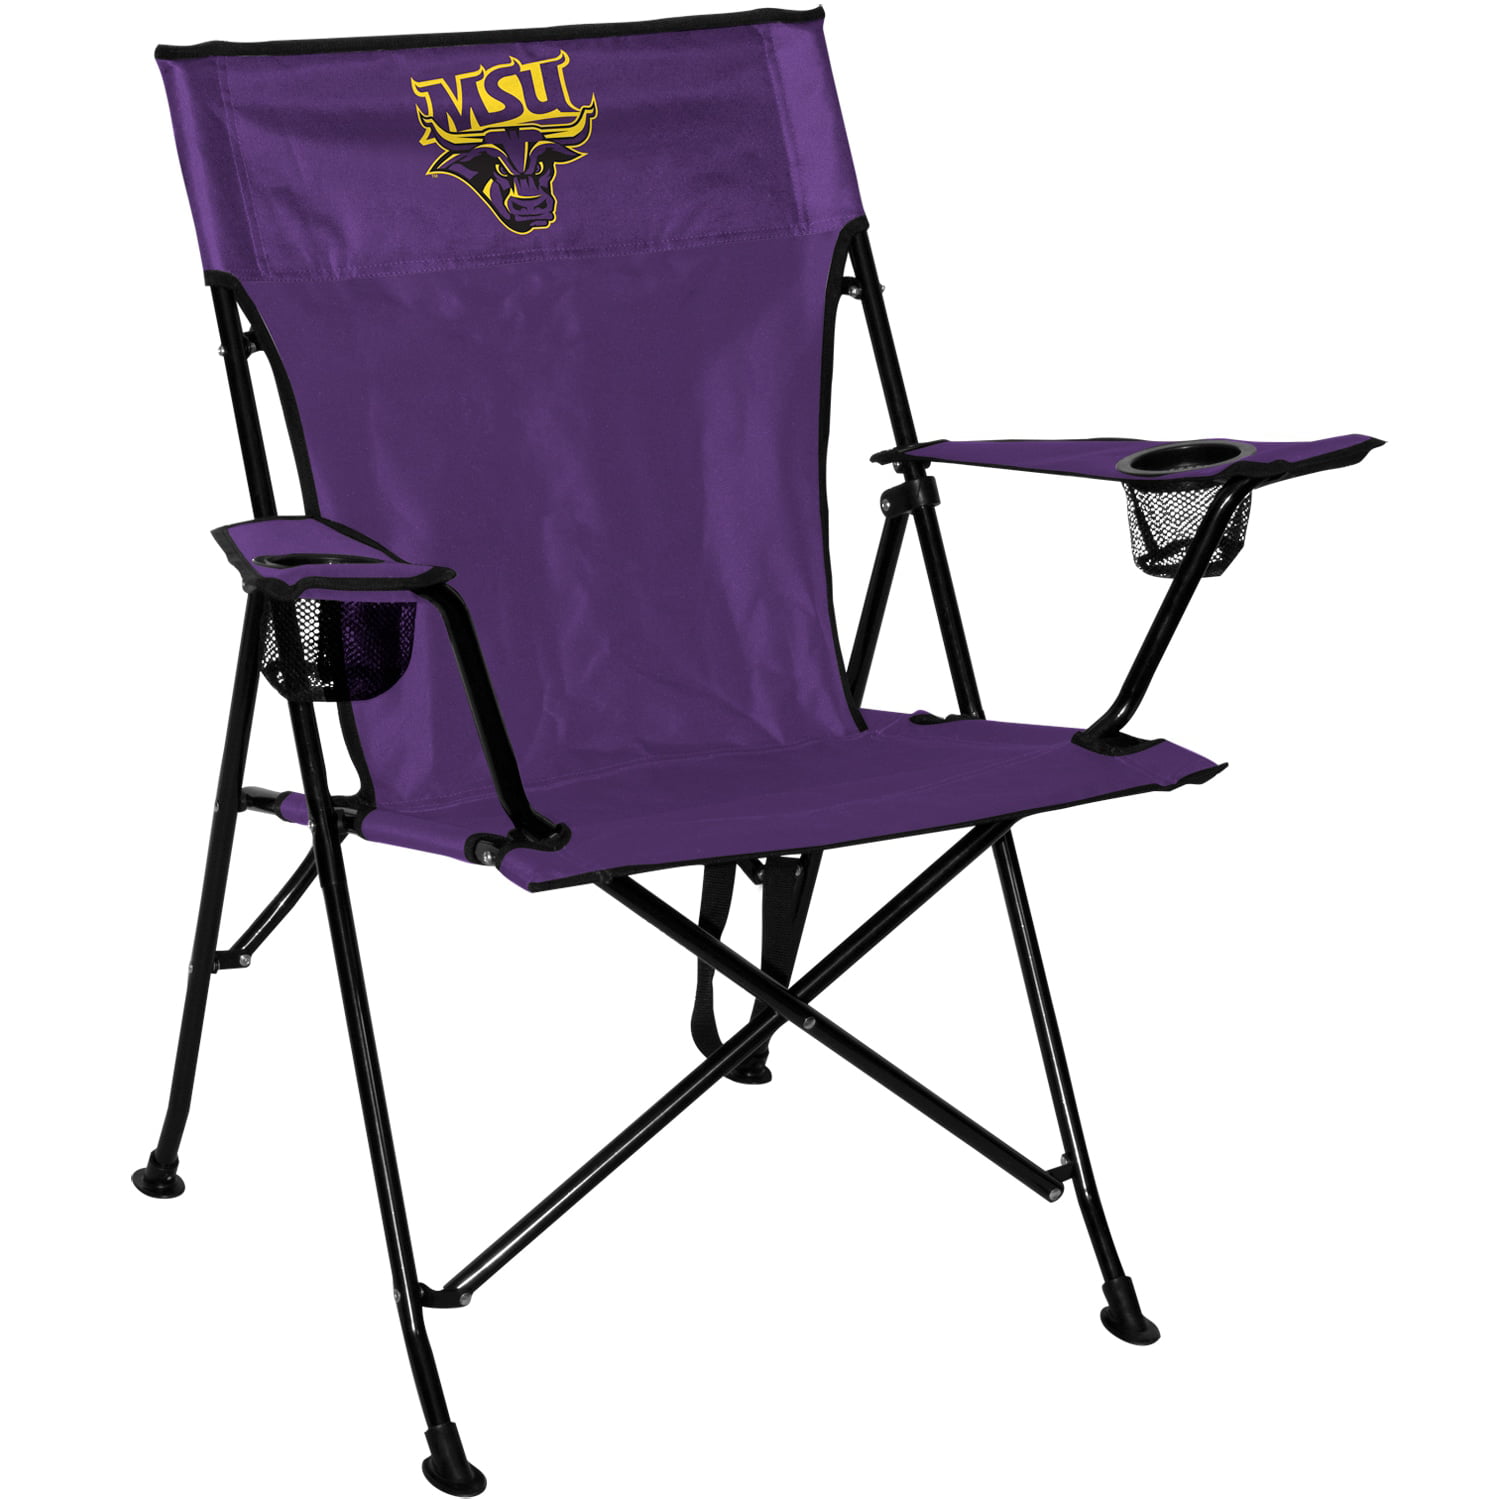 Texas Tech University Rawlings NCAA 4.0 Folding Tailgating & Camping Chair with Carry Case 